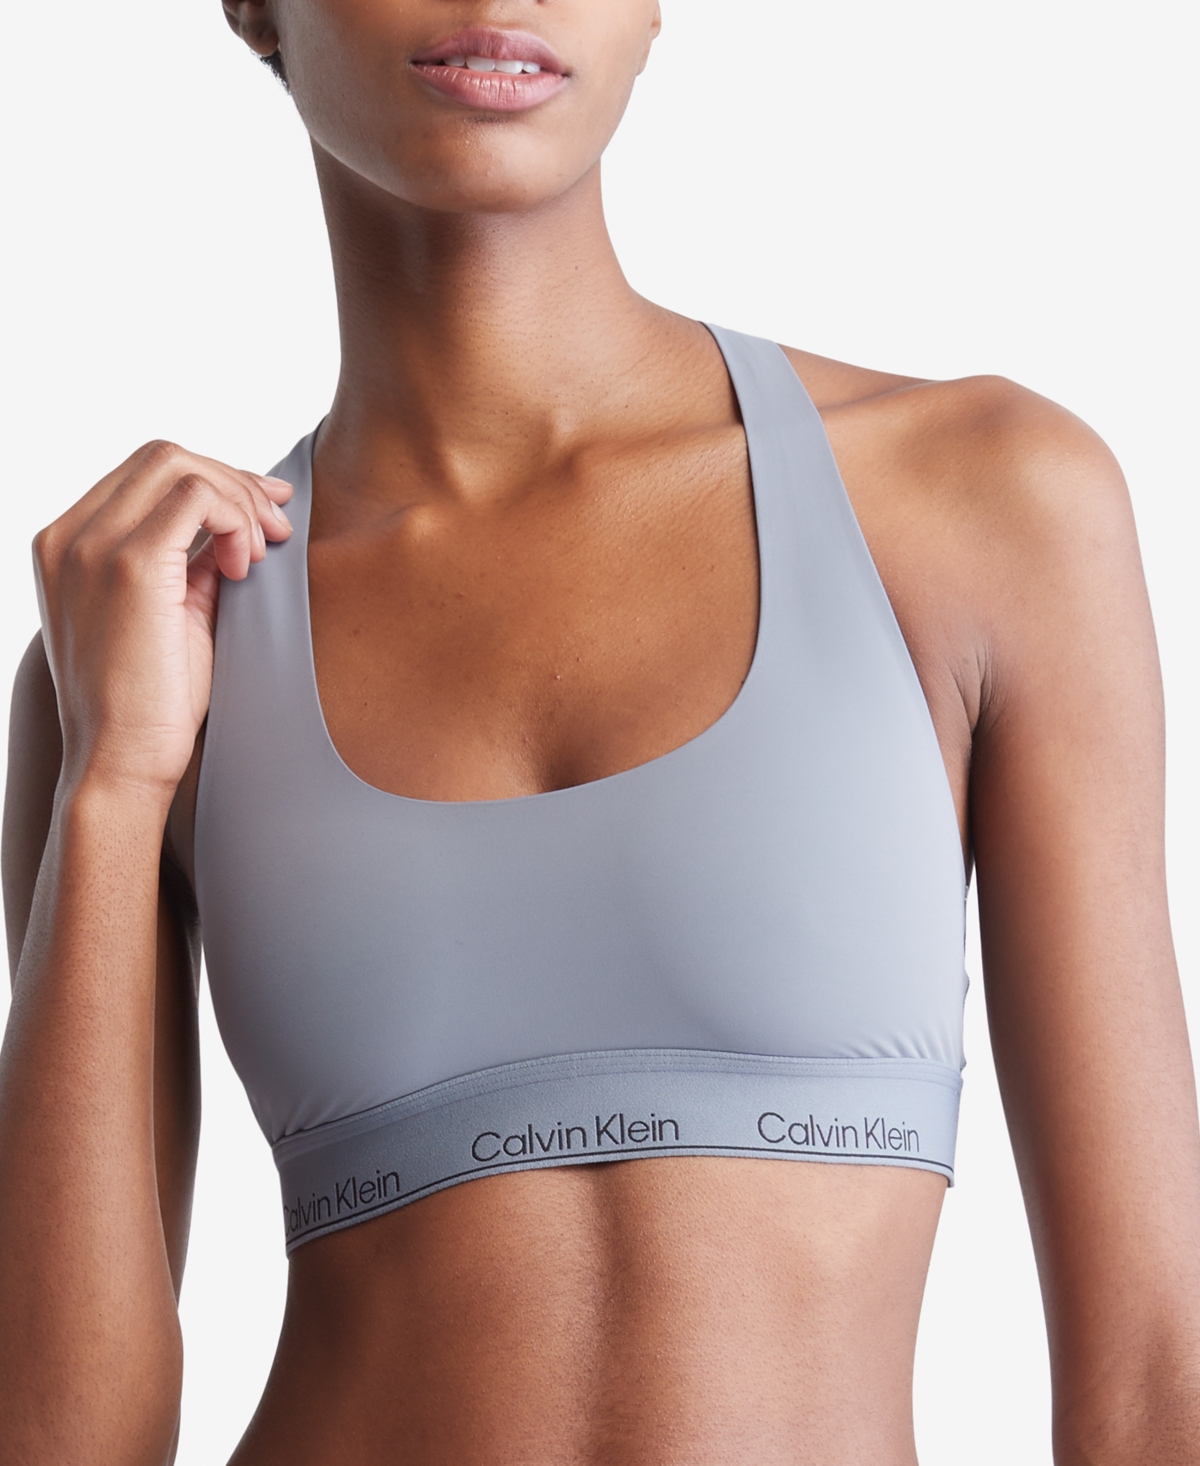 Calvin Klein - The Intrinsic Unlined Triangle Bralette and High